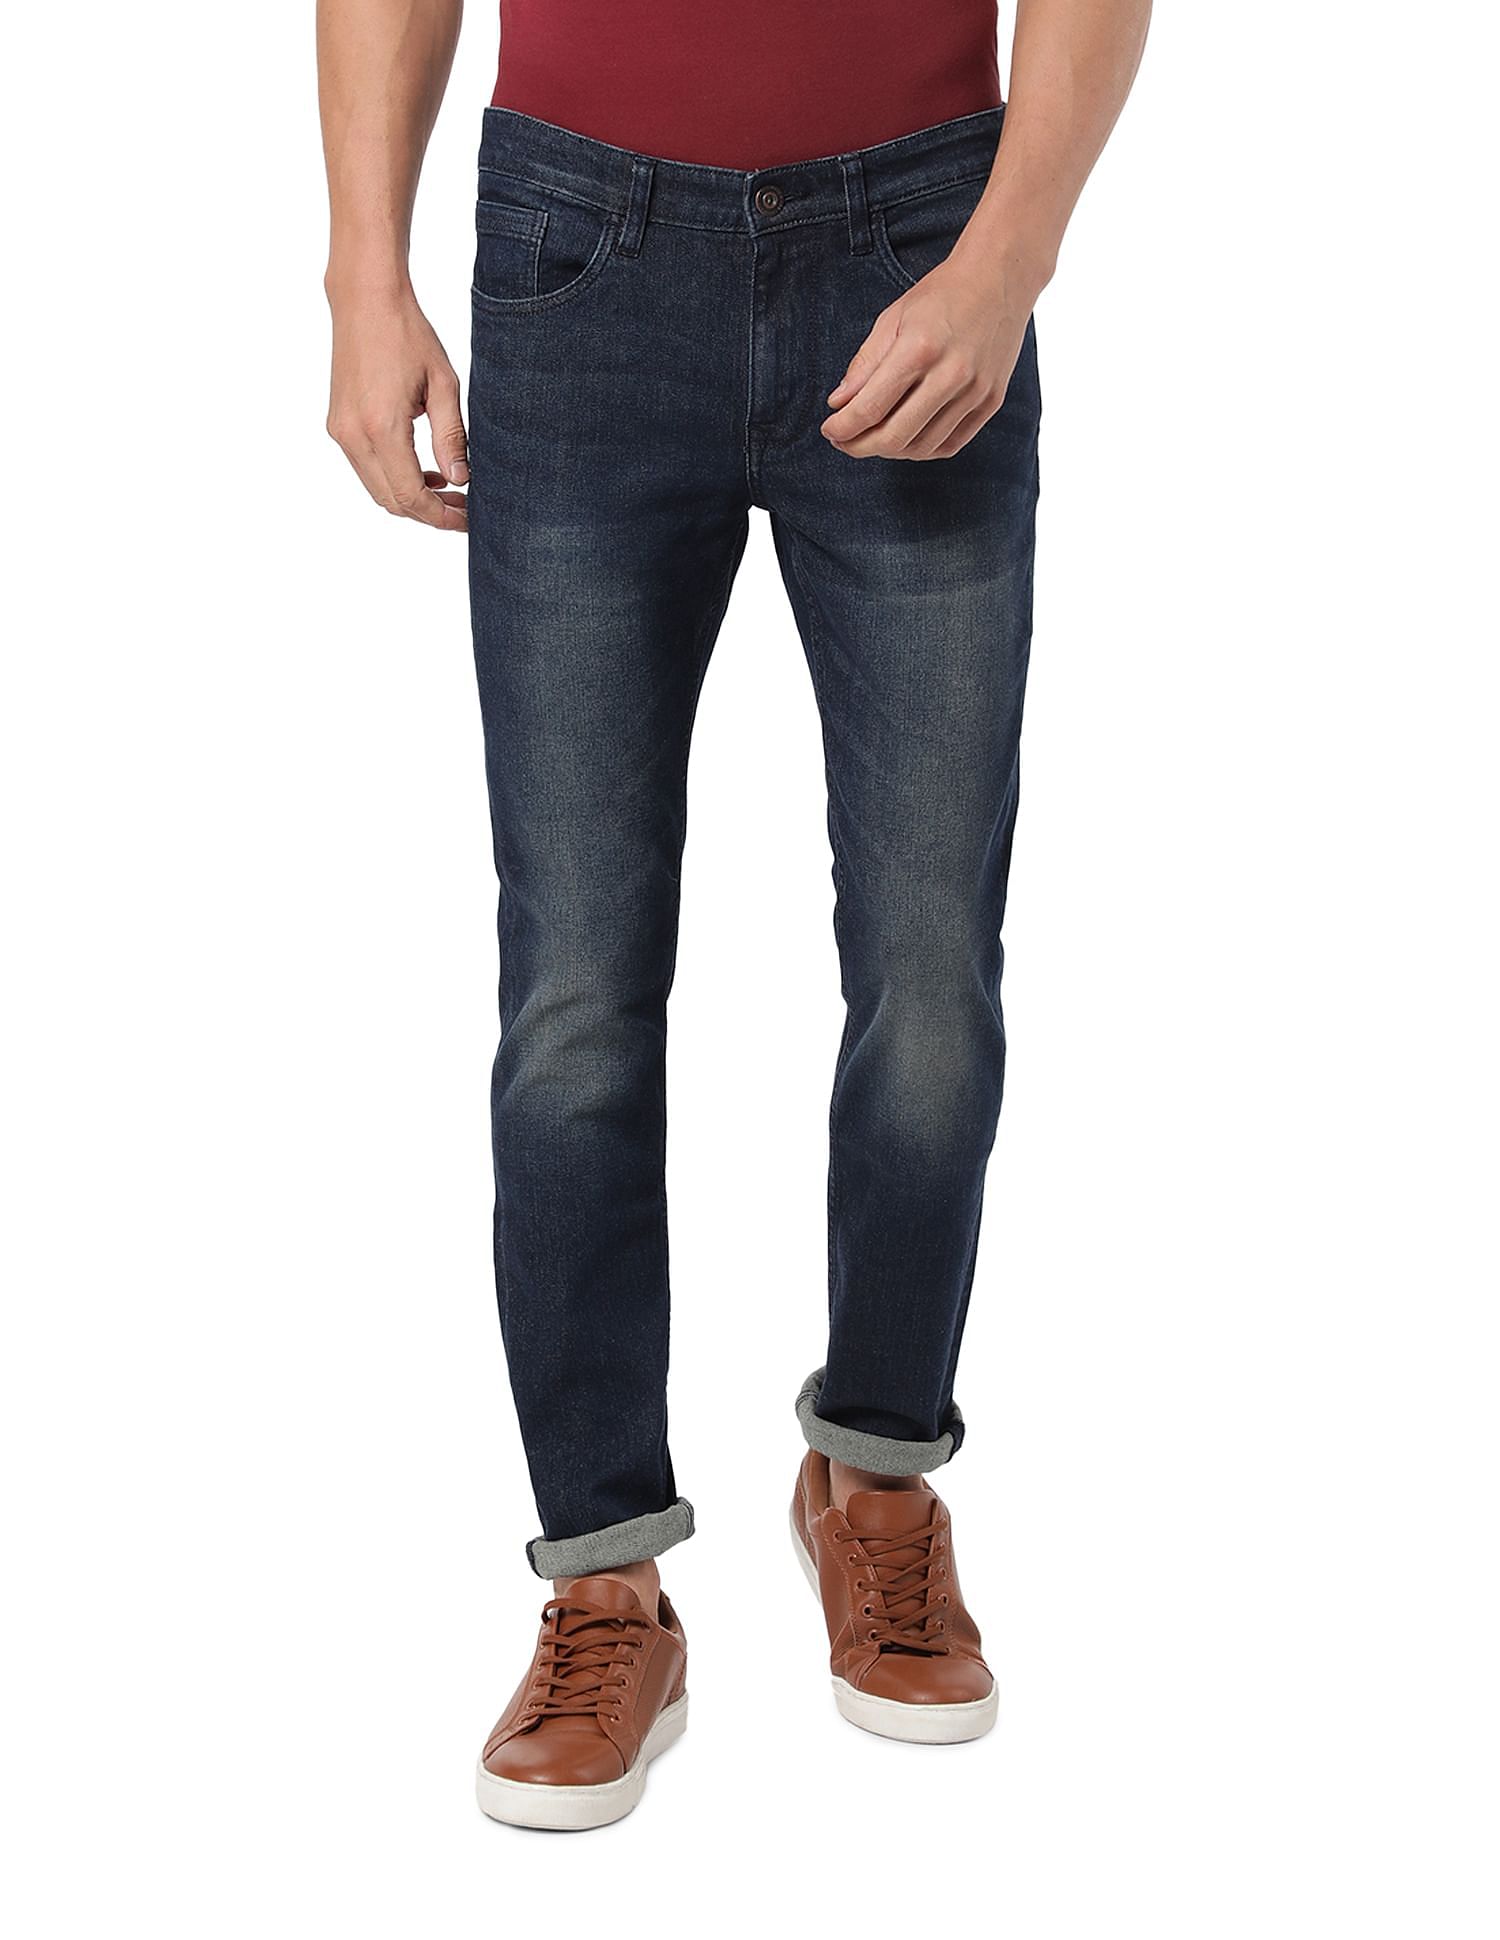 Buy AD by Arvind Slim Fit Washed Jeans - NNNOW.com